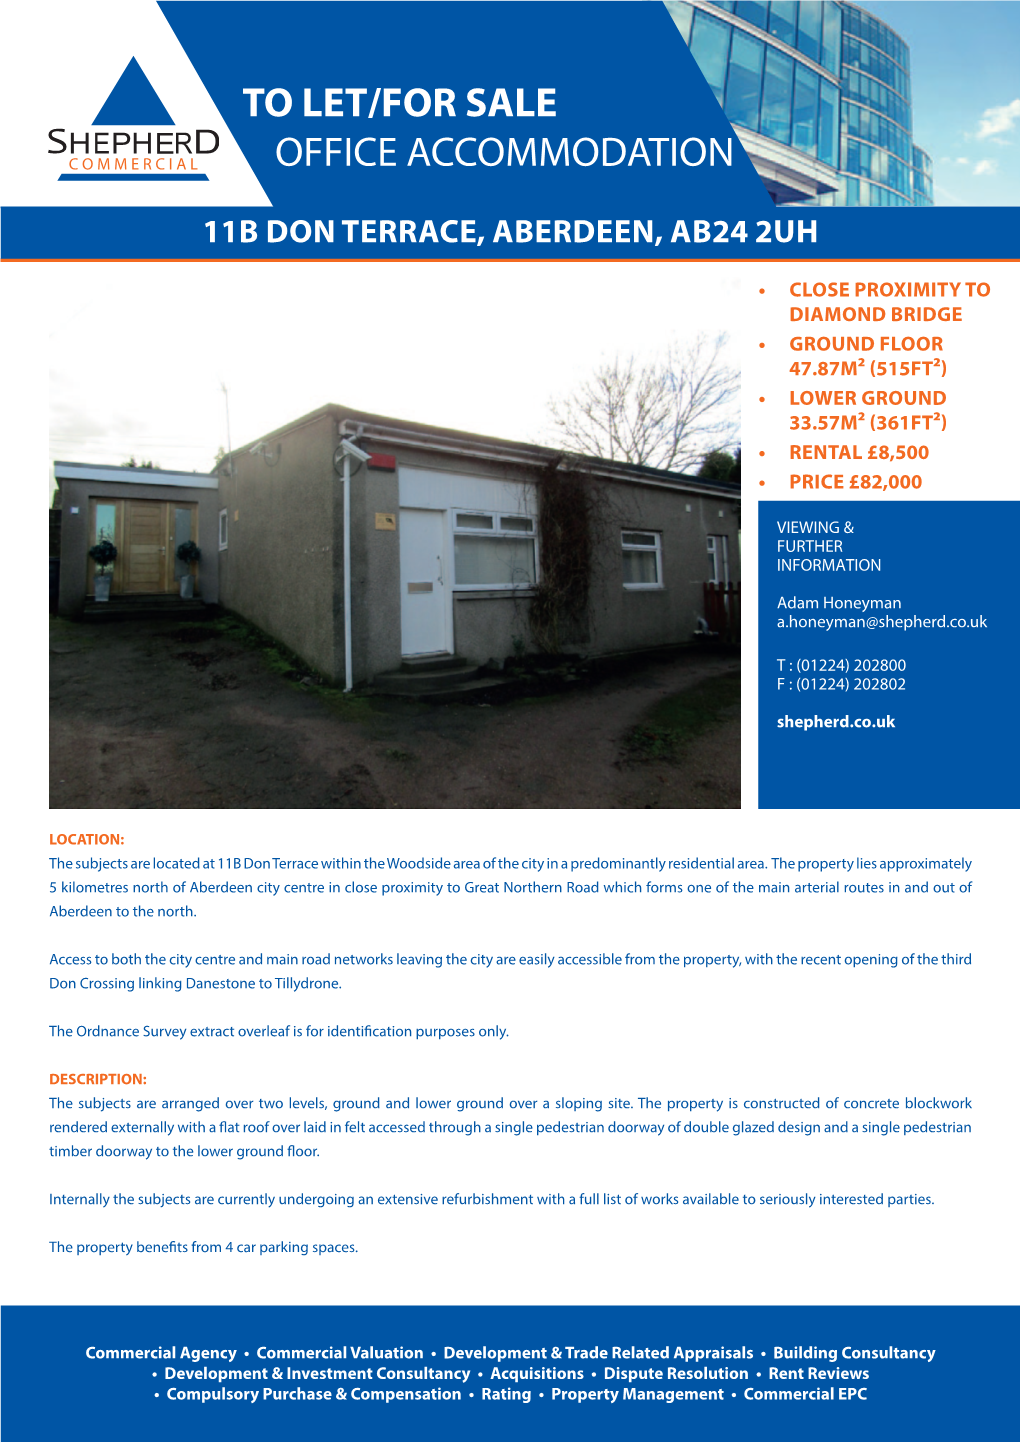 To Let/For Sale Office Accommodation